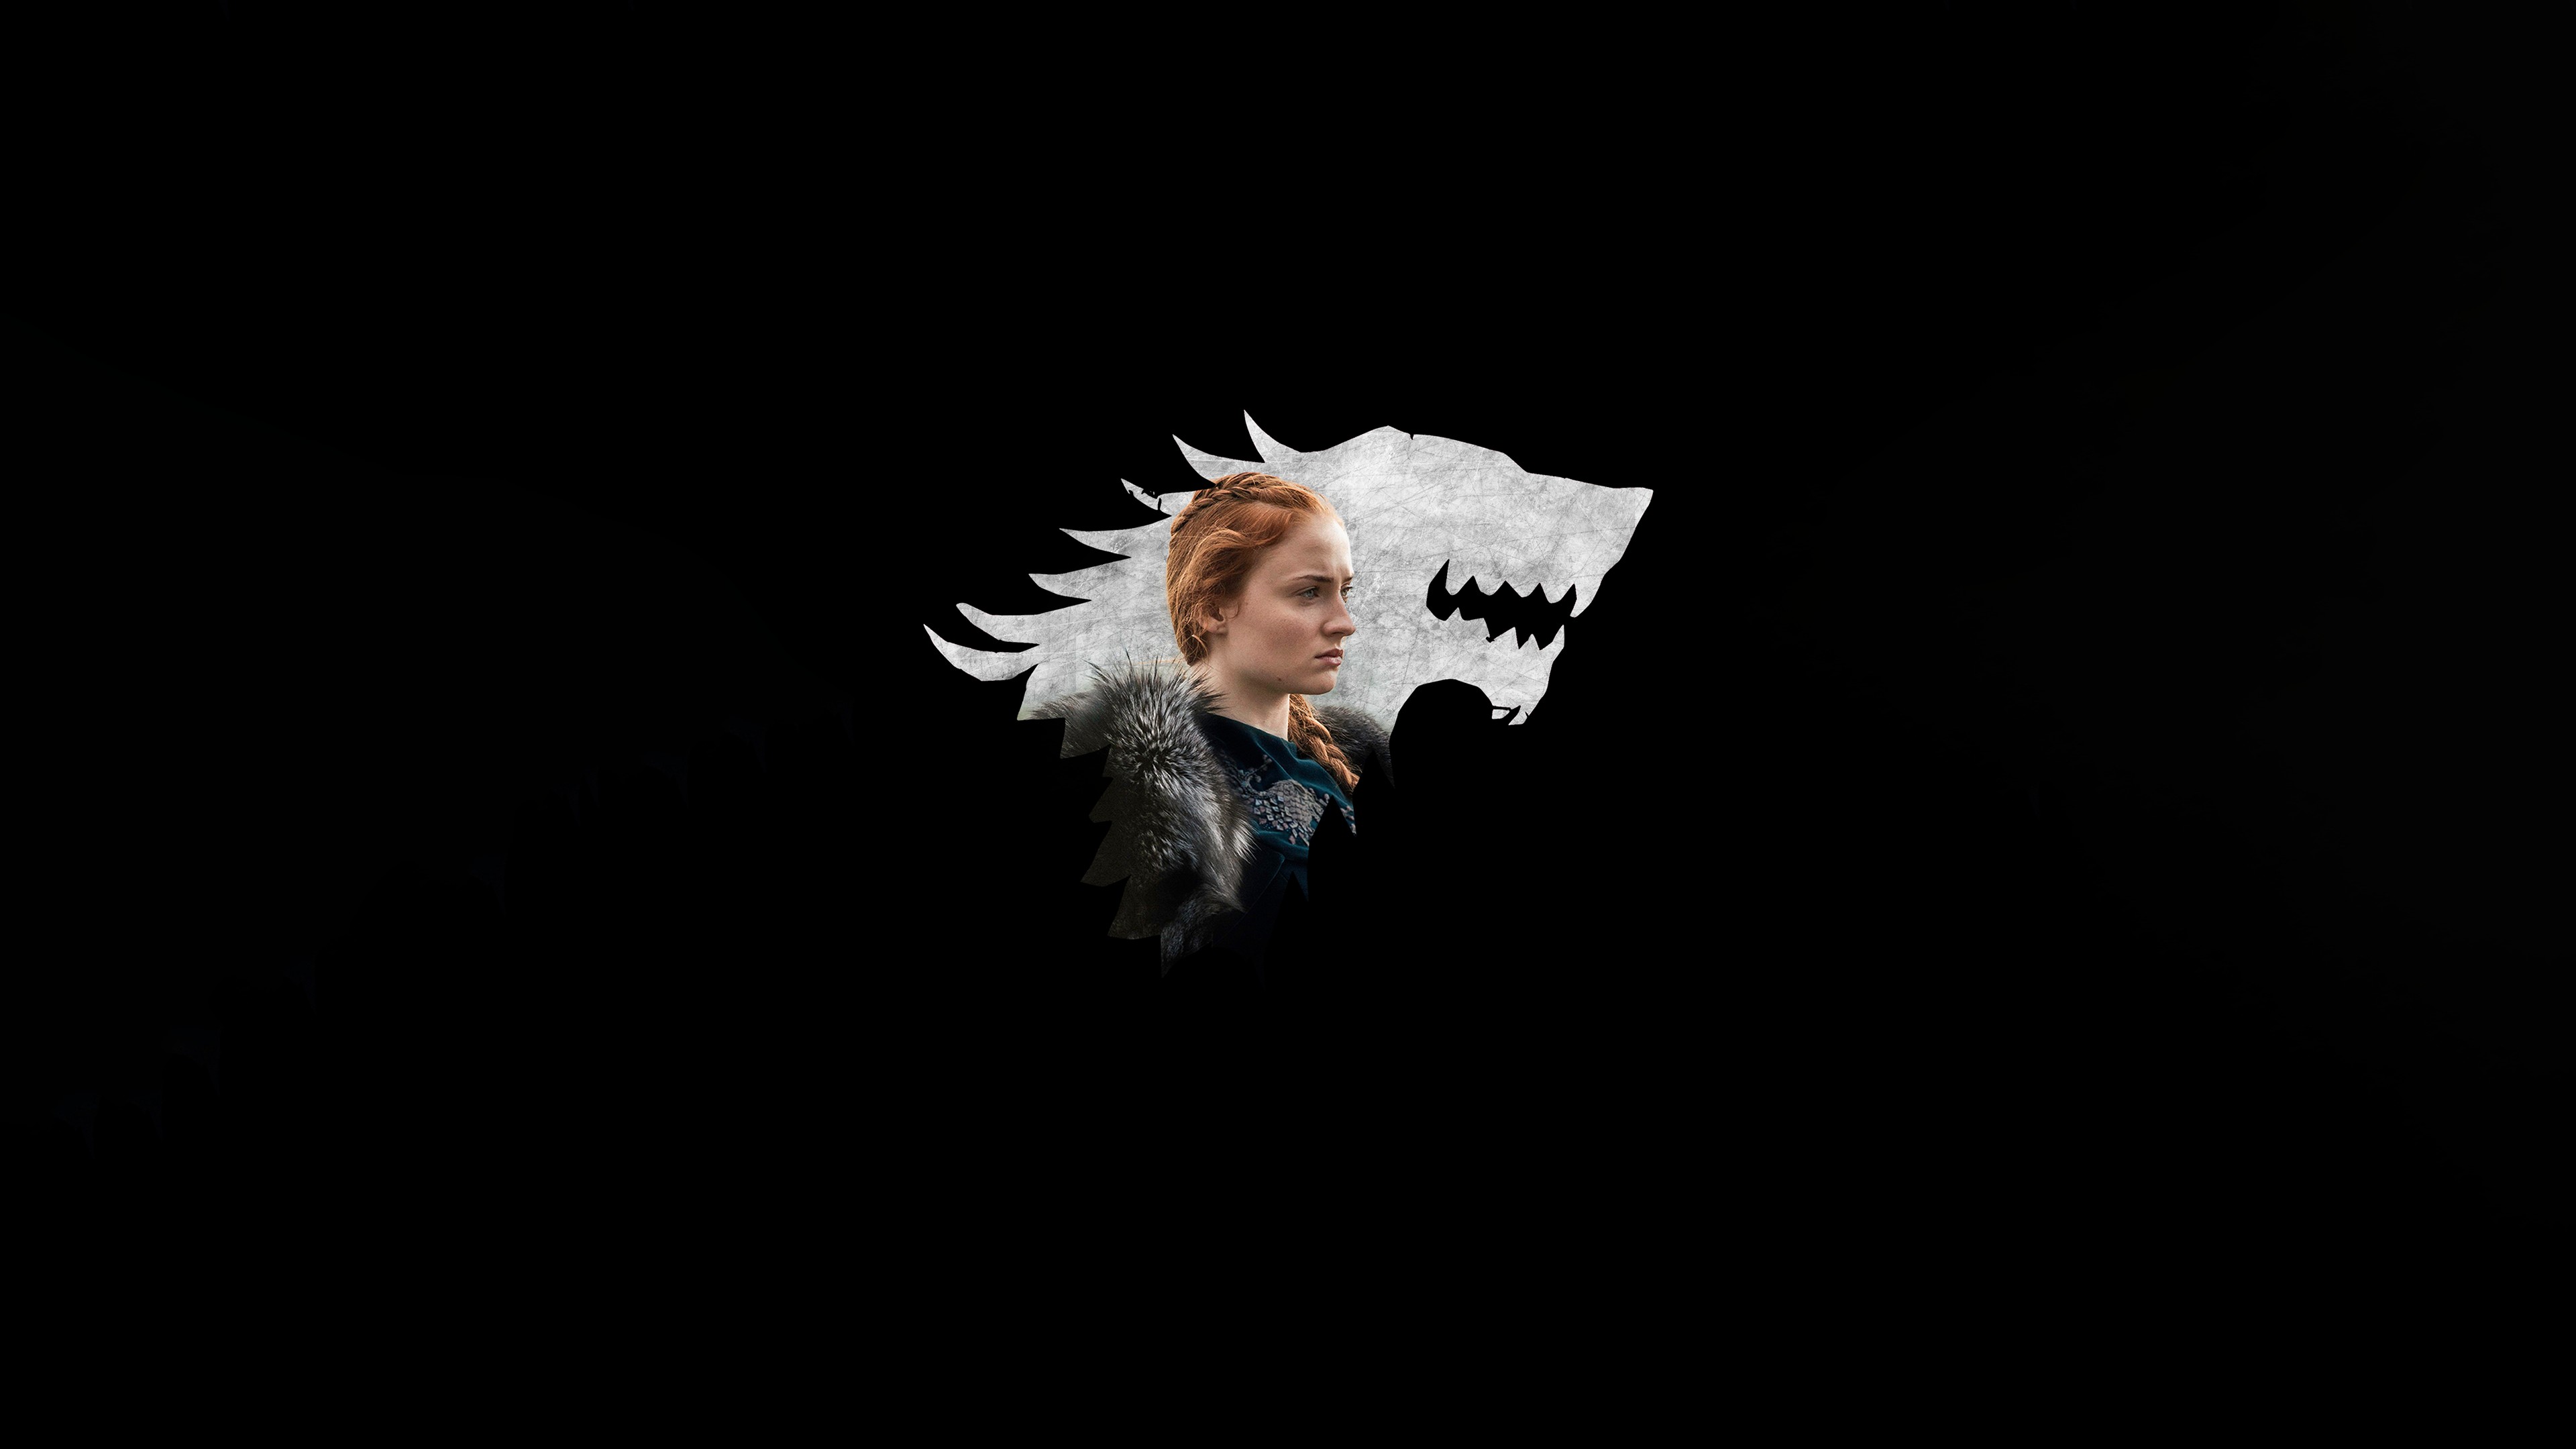 Sansa Stark, Simple, Simple background, Black background, A Song of Ice and Fire, Game of Thrones Wallpaper